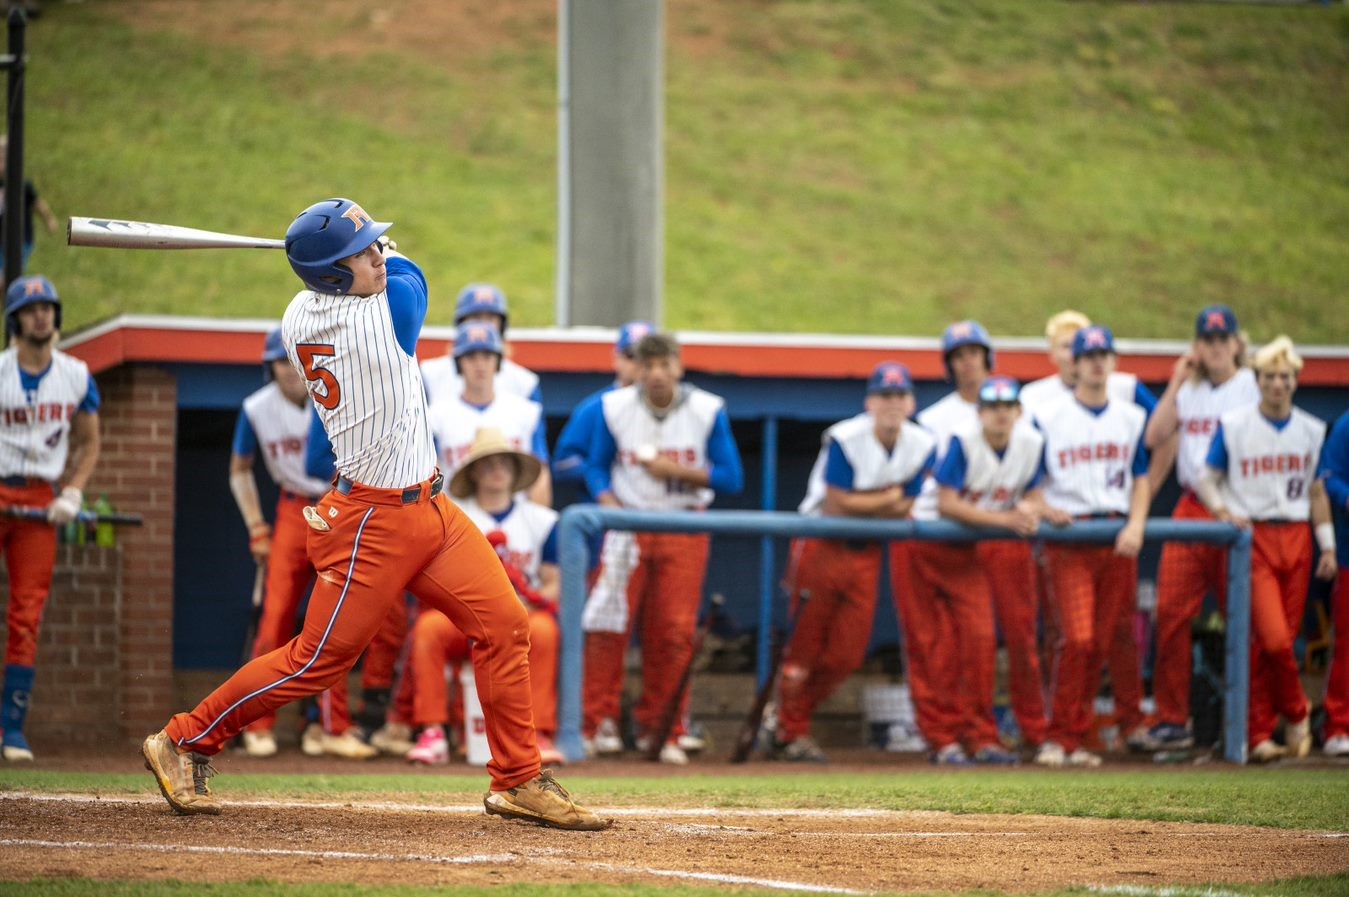 Randleman baseball's Brooks Brannon, a UNC commit, selected by